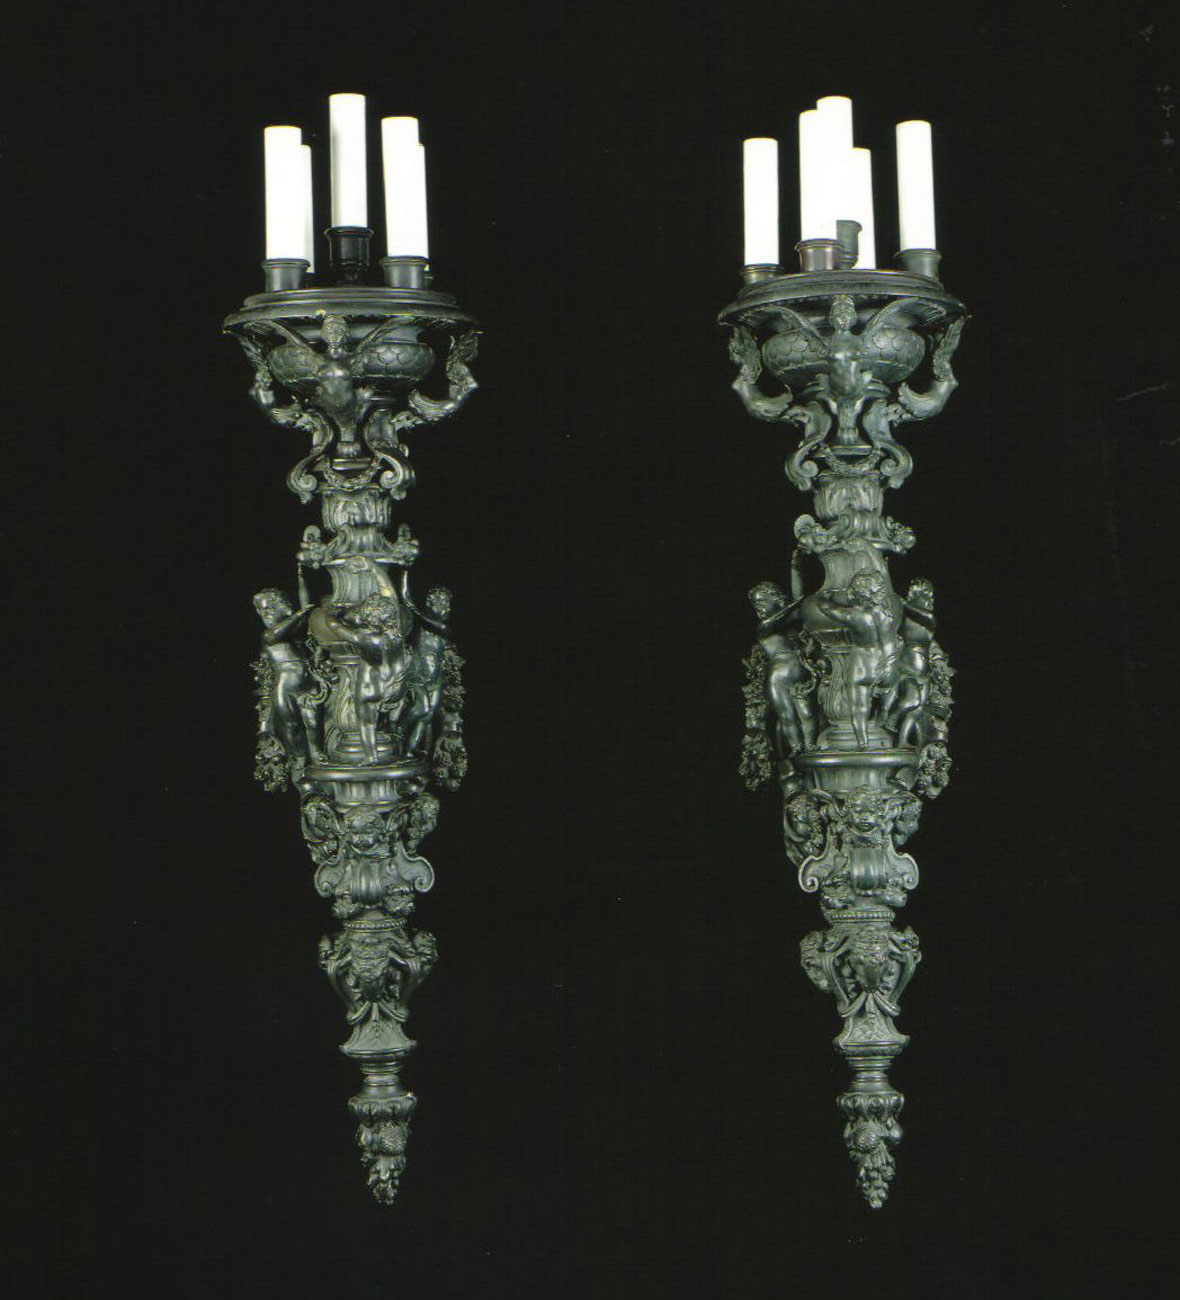 Caldwell Chandelier and Wall Appliques